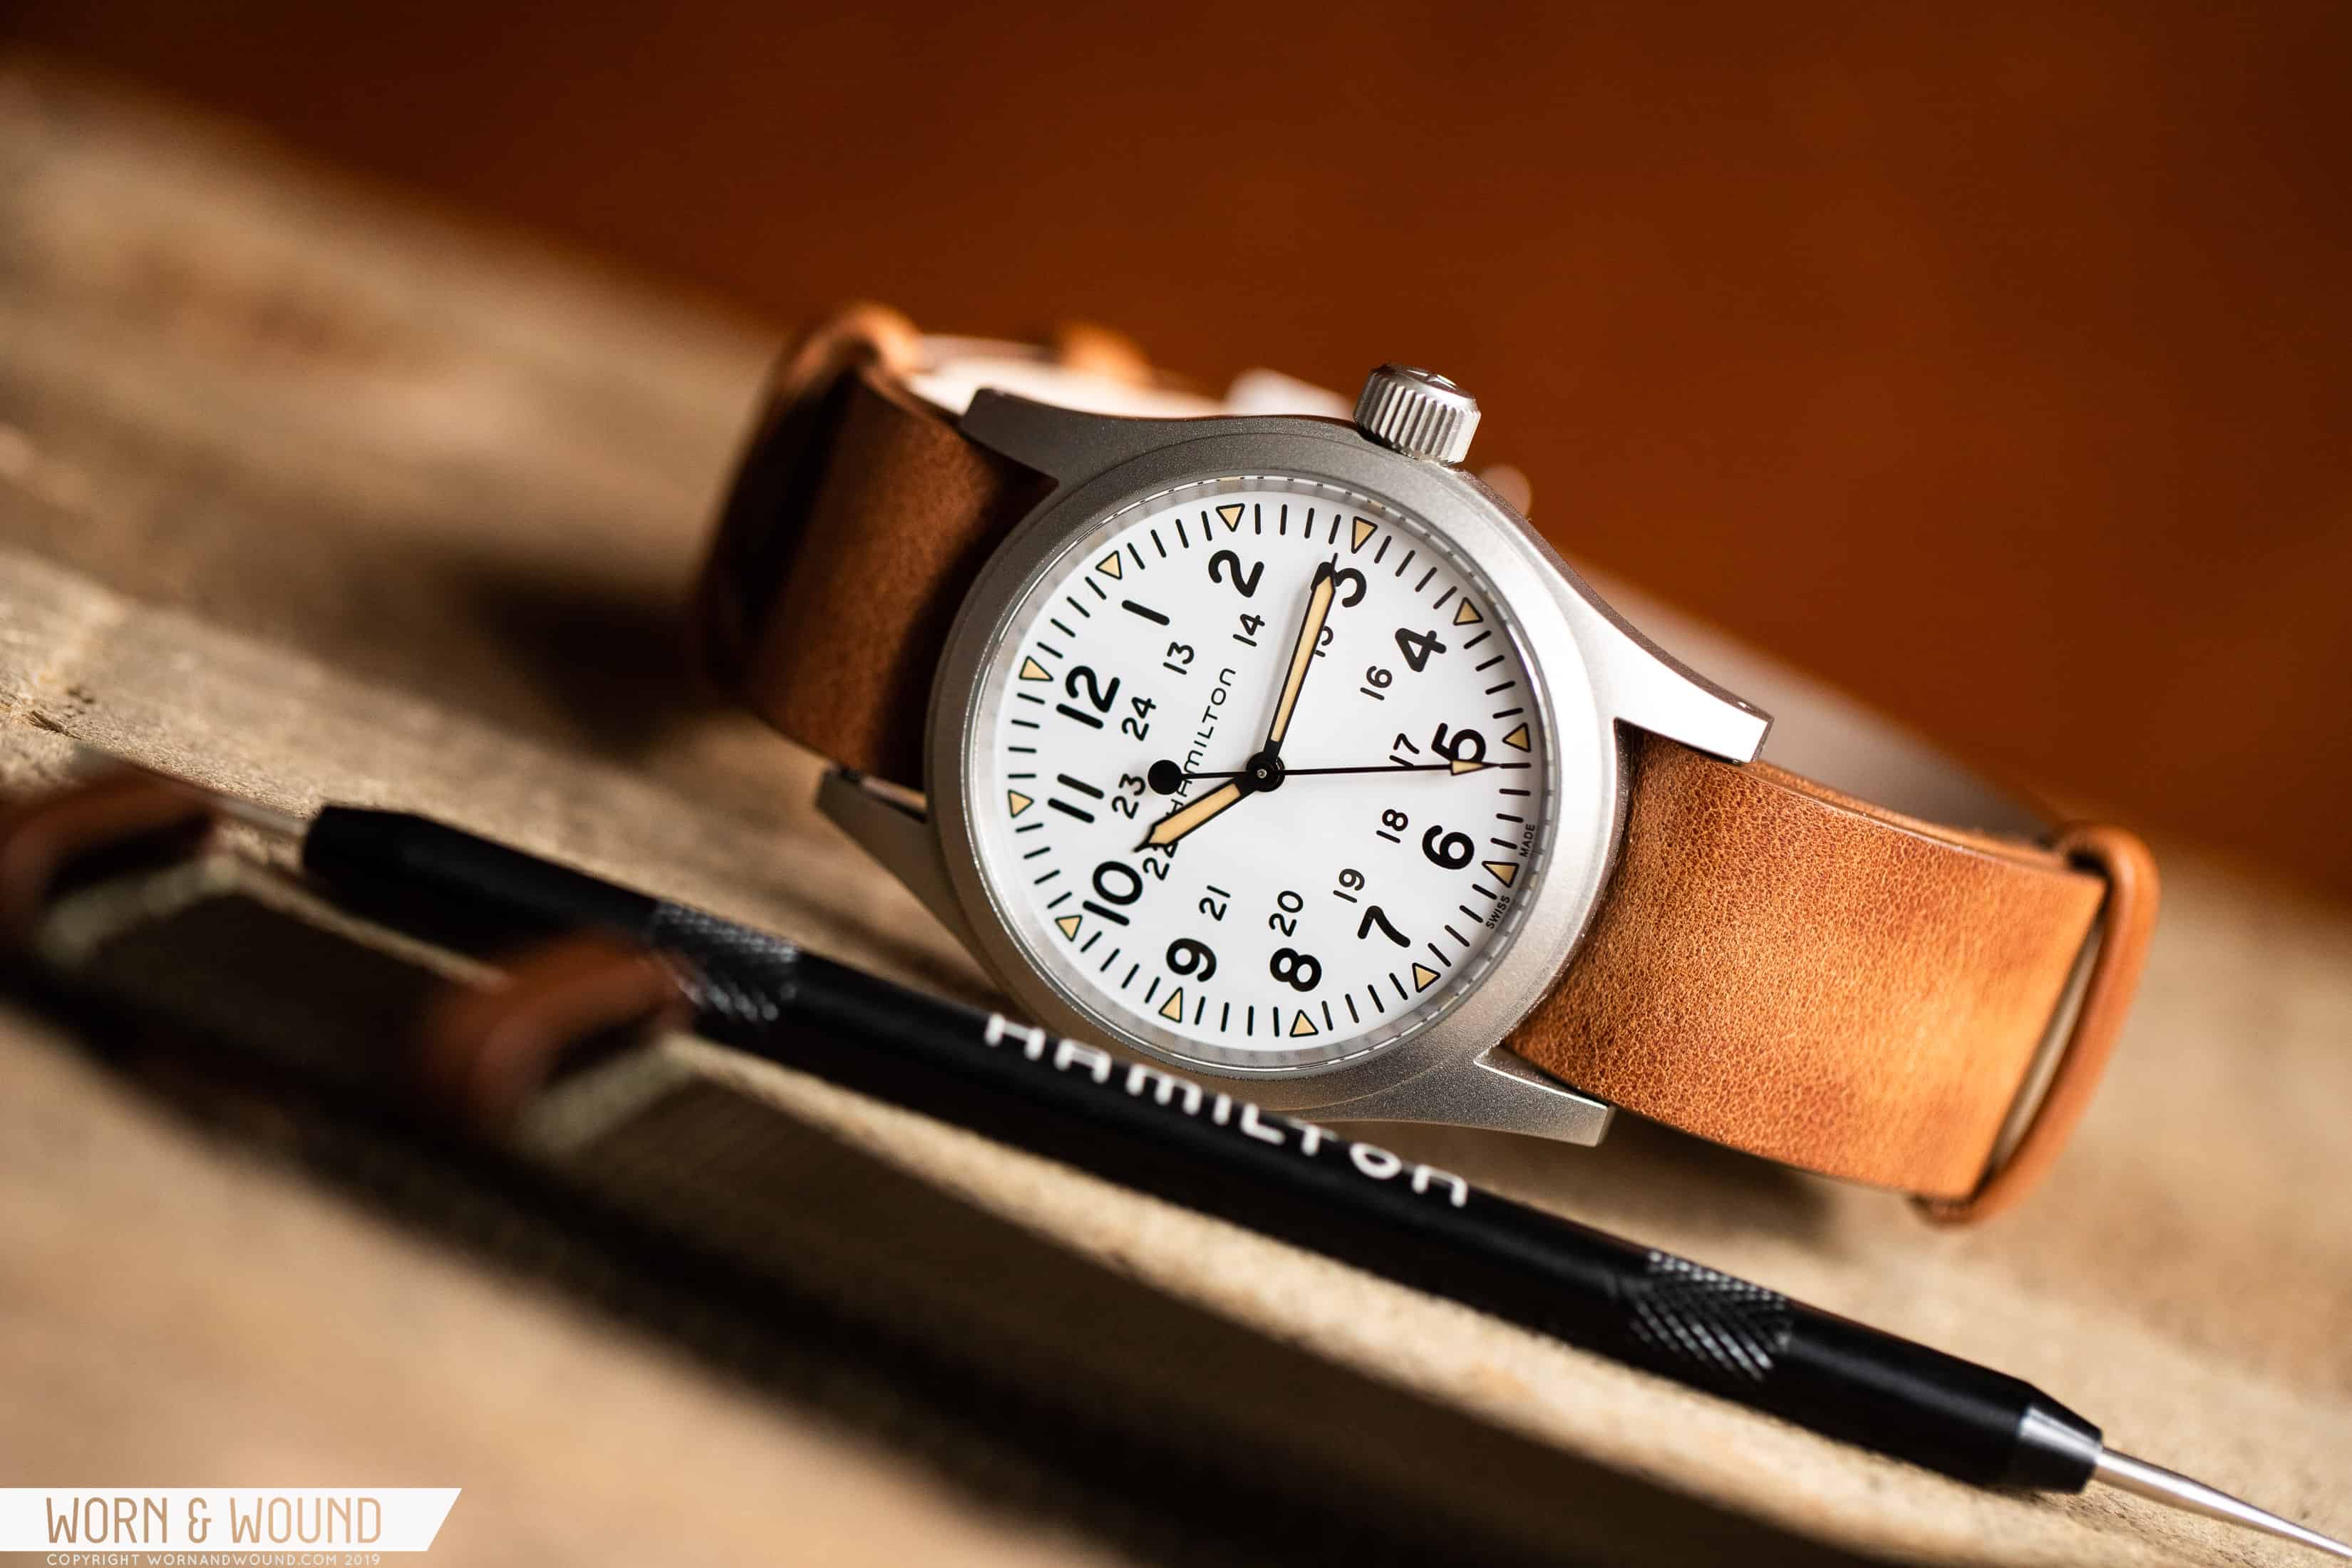 The Hamilton Khaki Field Mechanical With a White Dial, Now Available Through Topper Jewelers